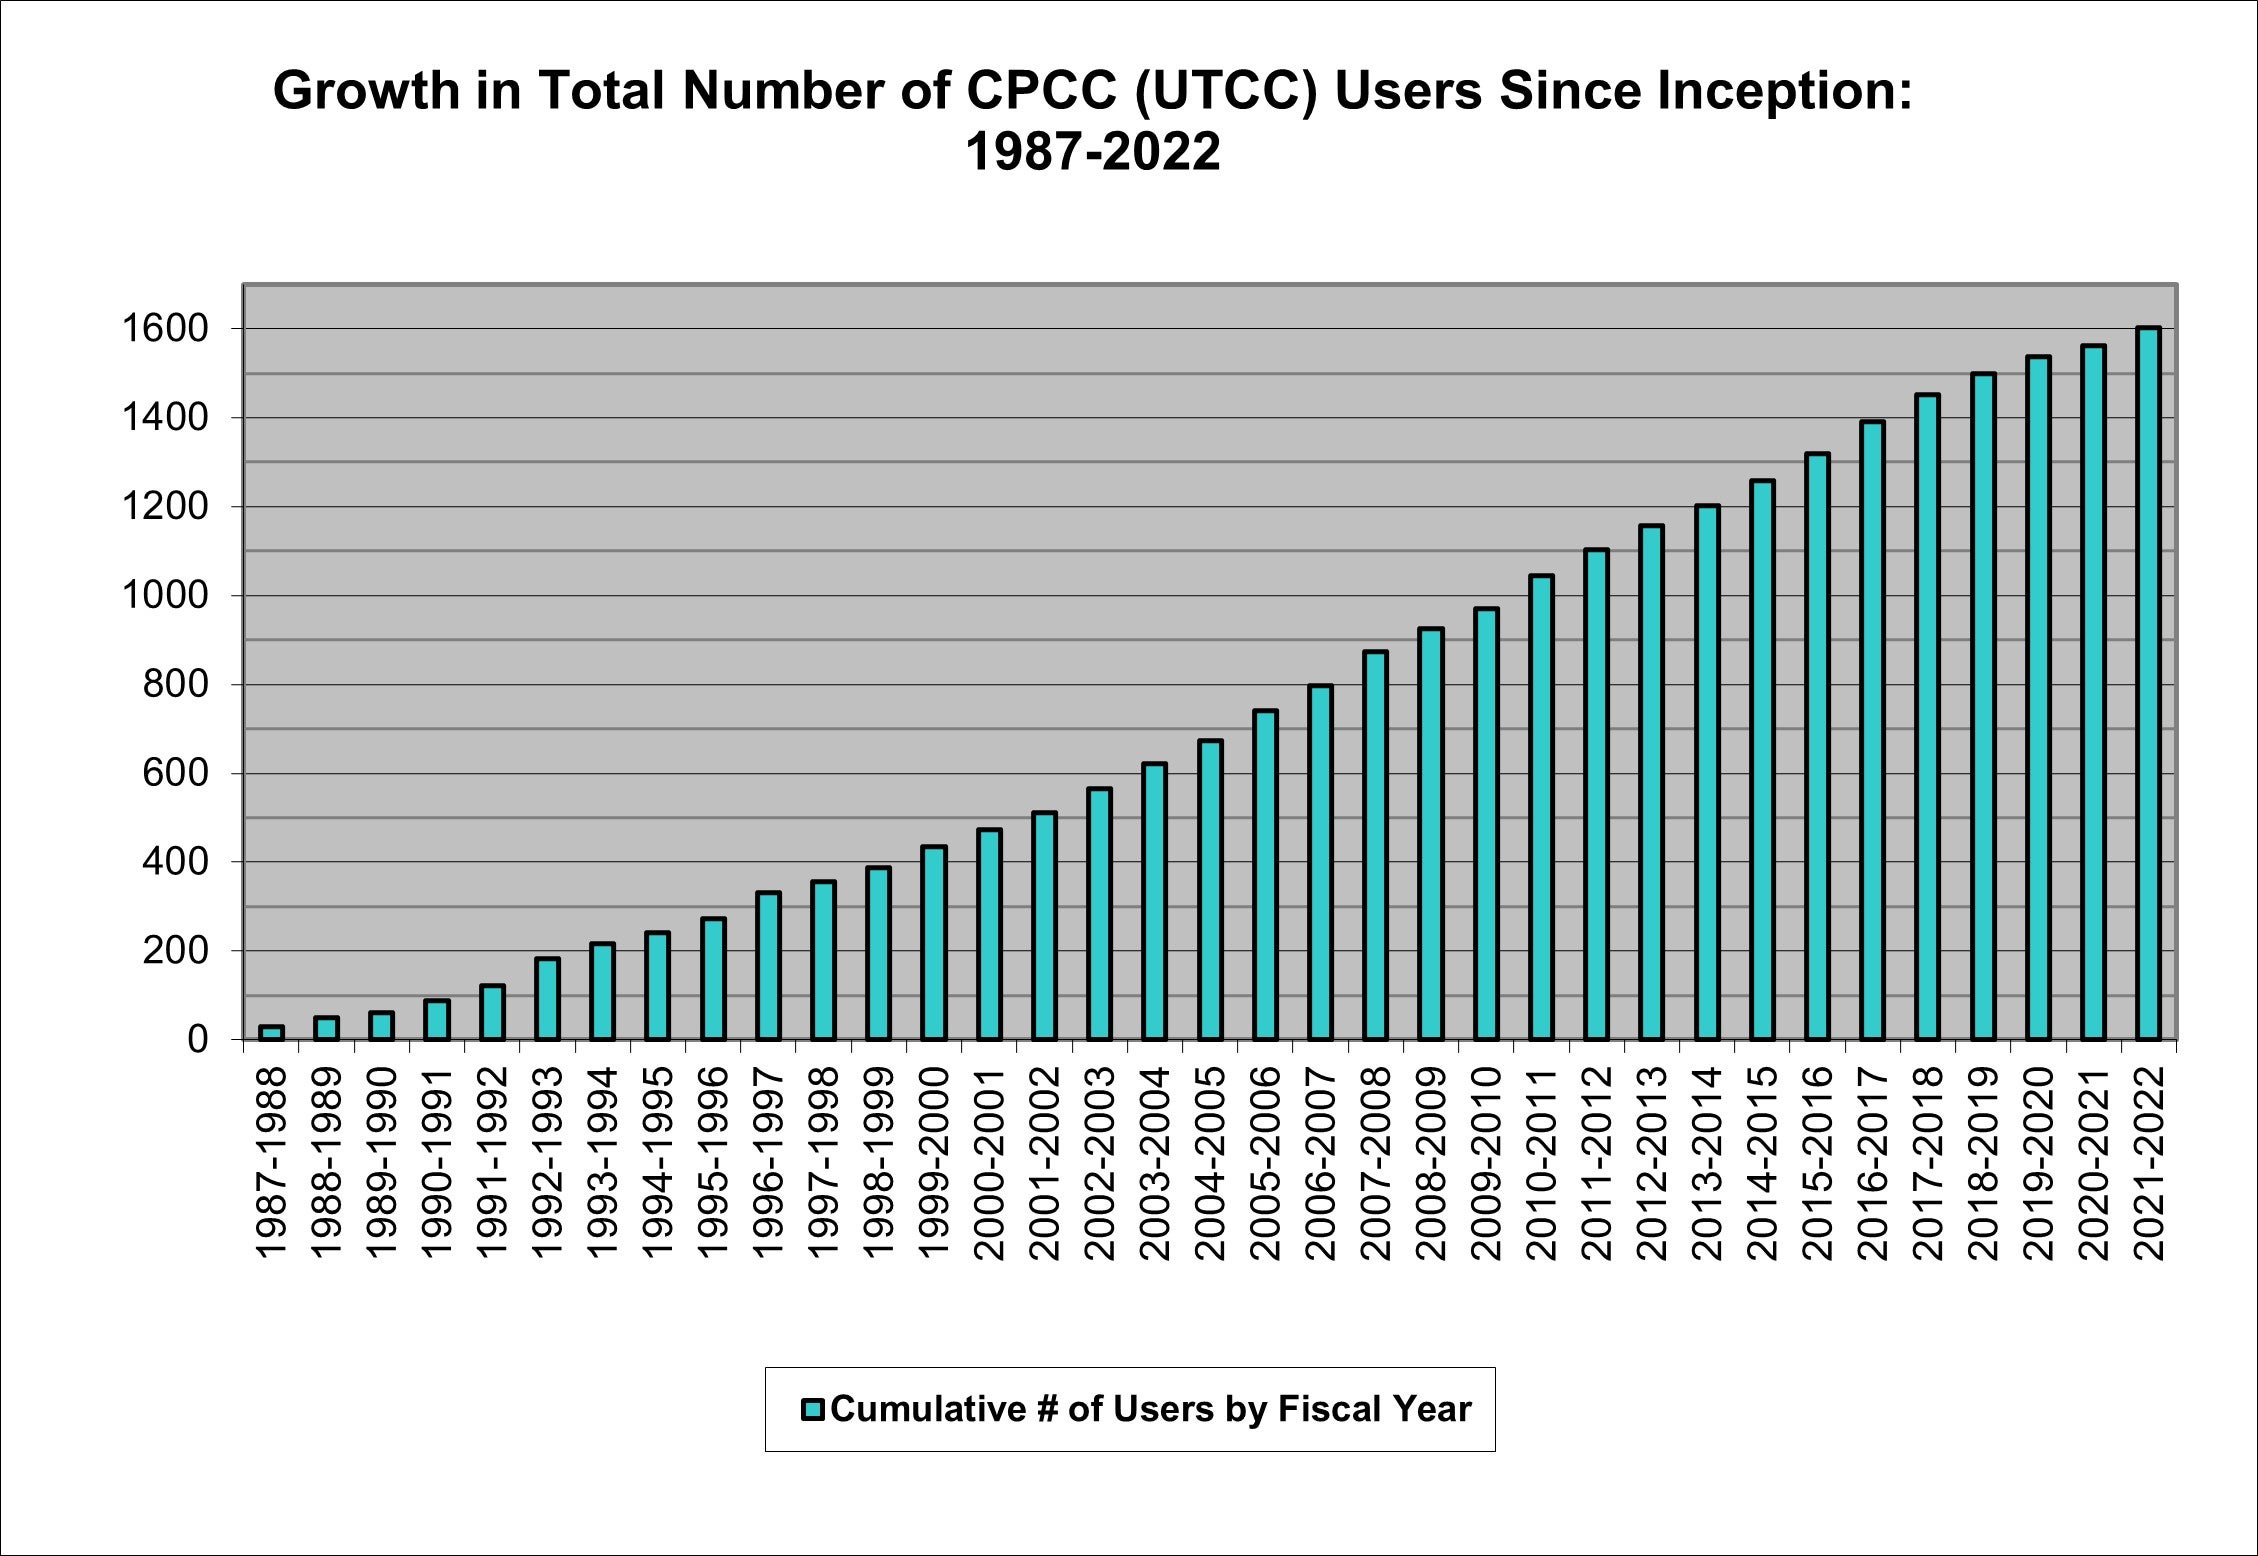 Growth in total number of CPCC (UTCC) users since inception 1987-2022